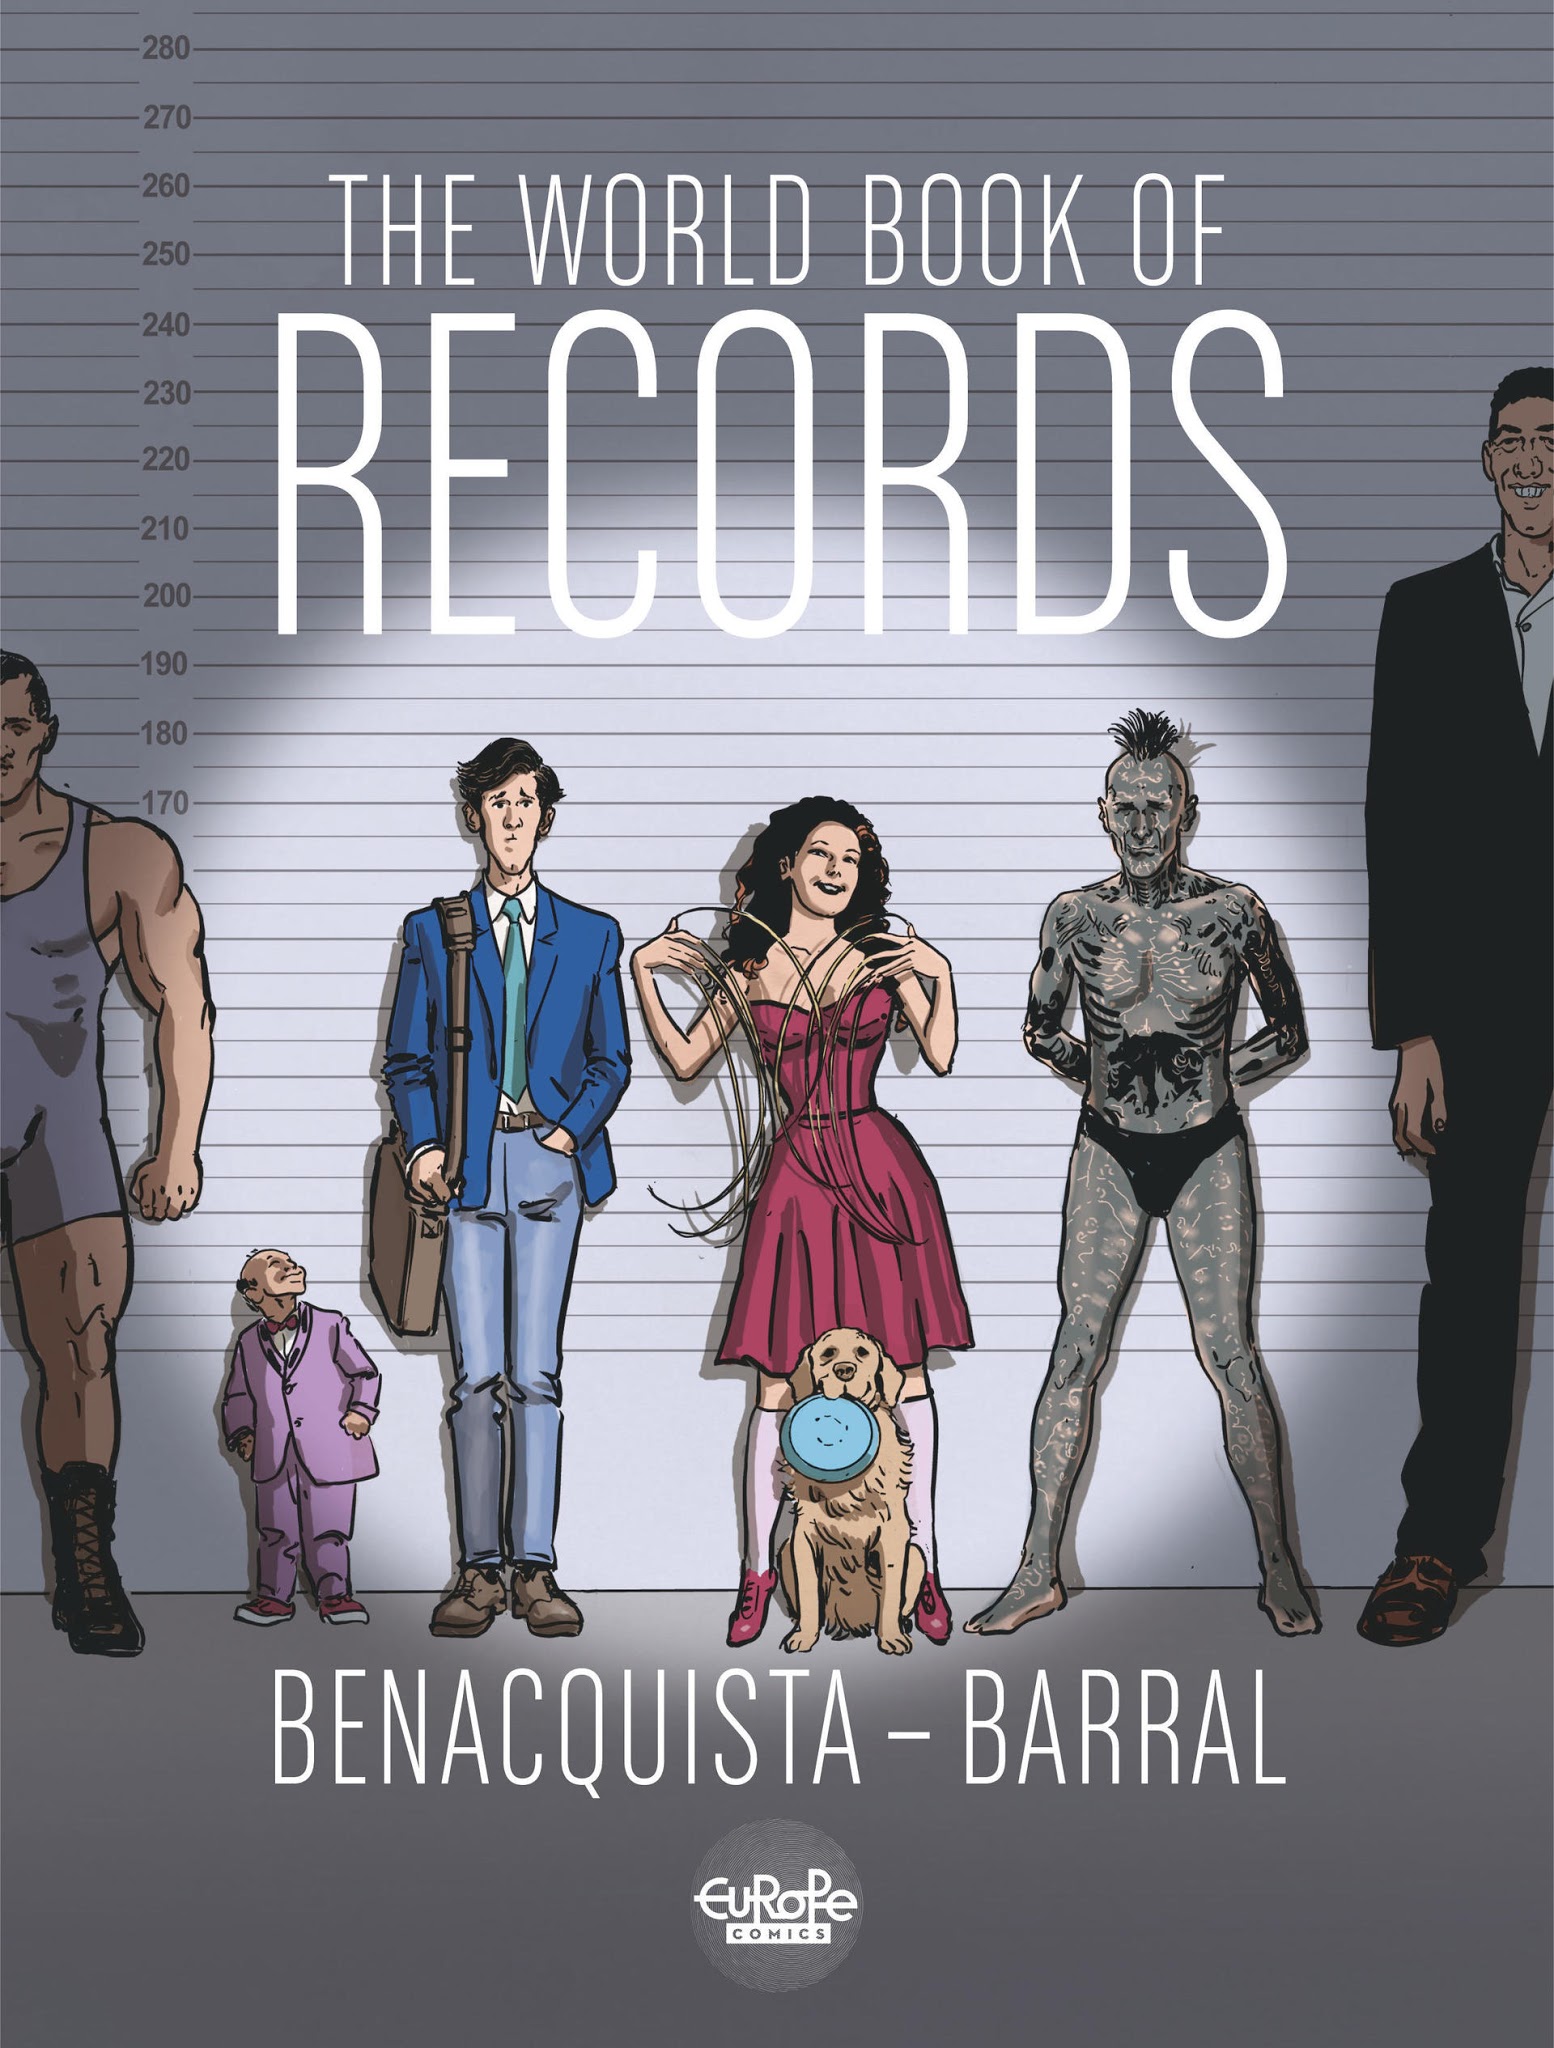 Read online The World Book of Records comic -  Issue # Full - 1